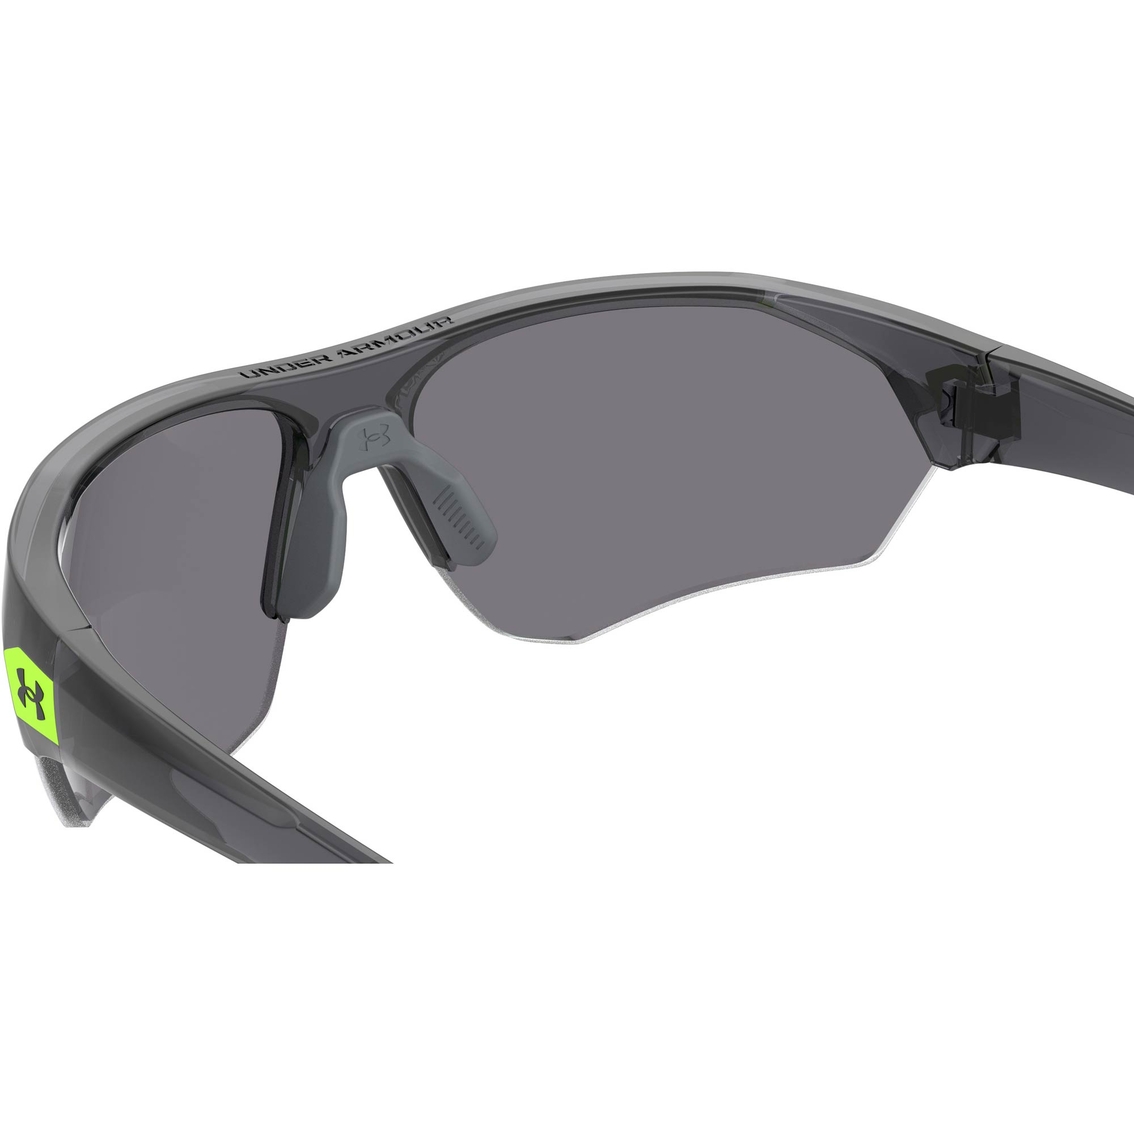 Under Armour Youth Dual Lens Sunglasses UA7000/S - Image 3 of 4